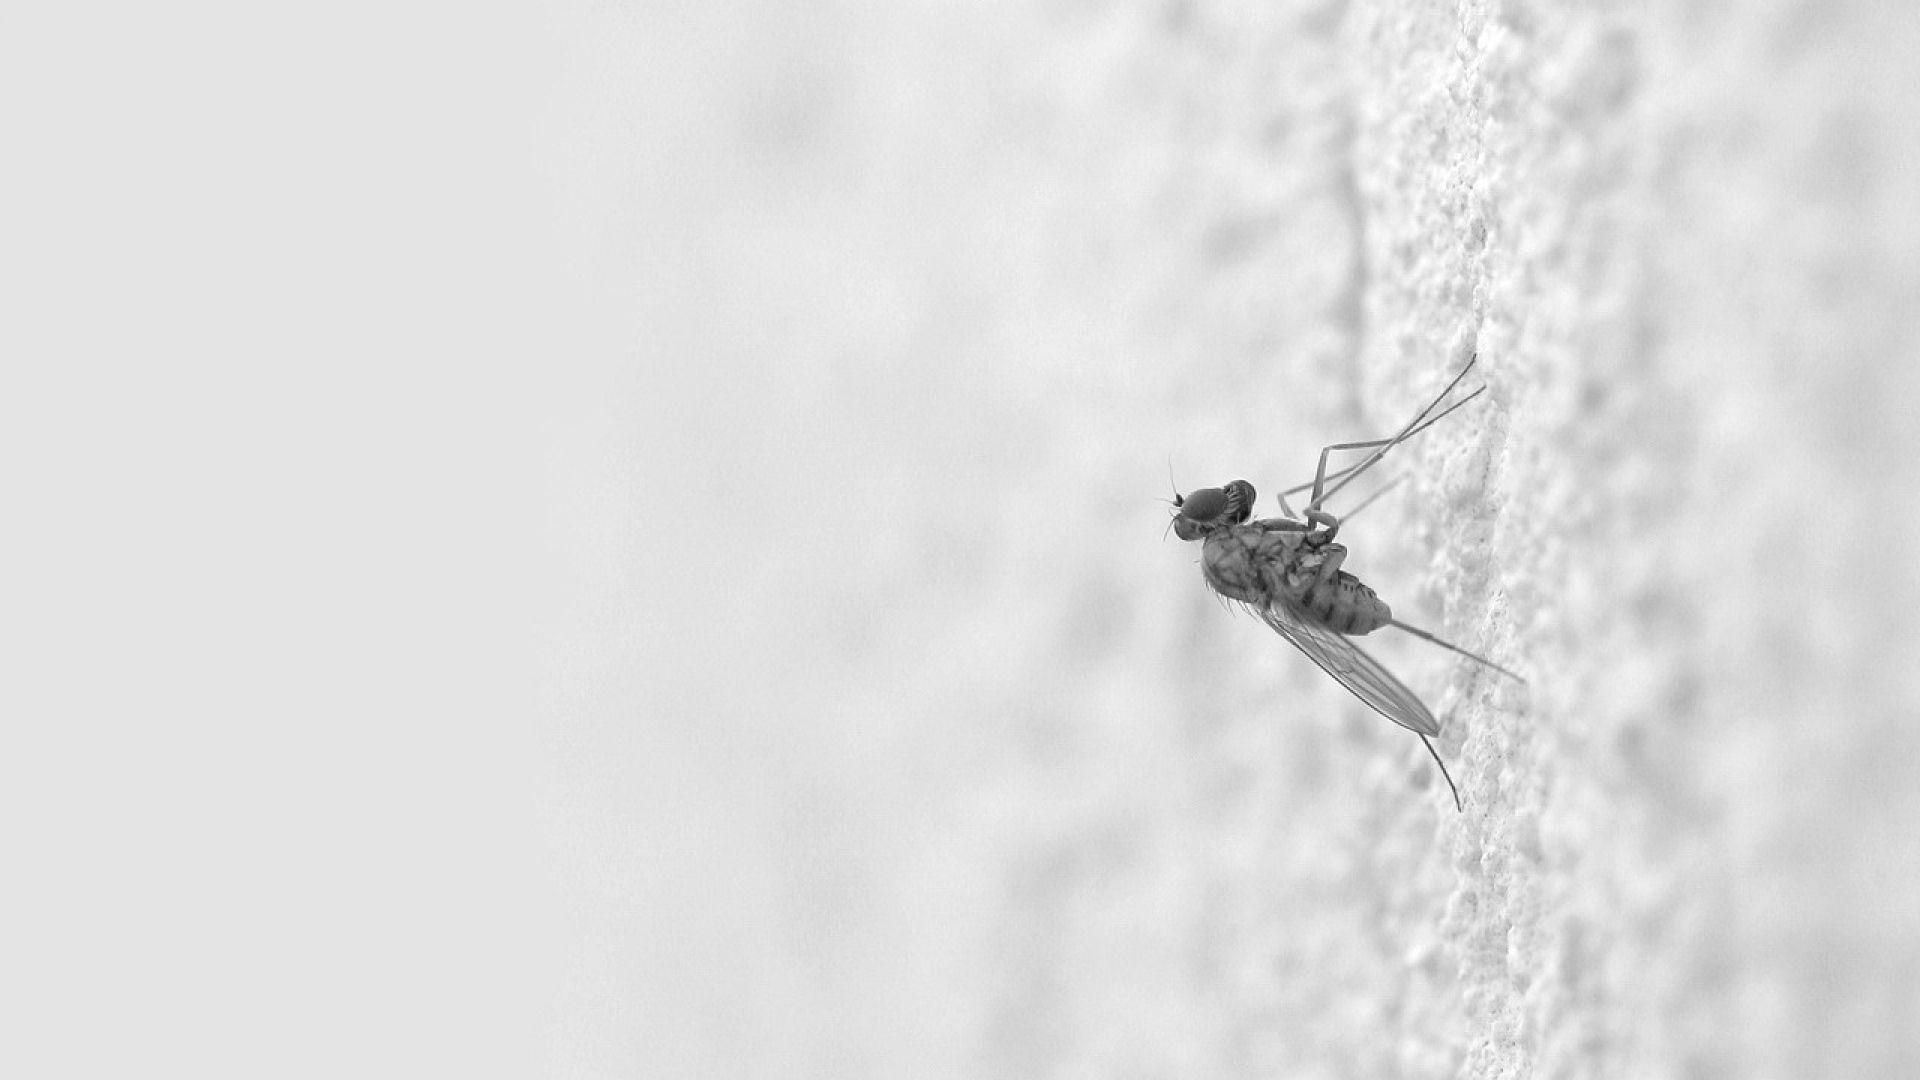 Download Wallpaper 1920x1080 Mosquito, Insect, Surface, Creep